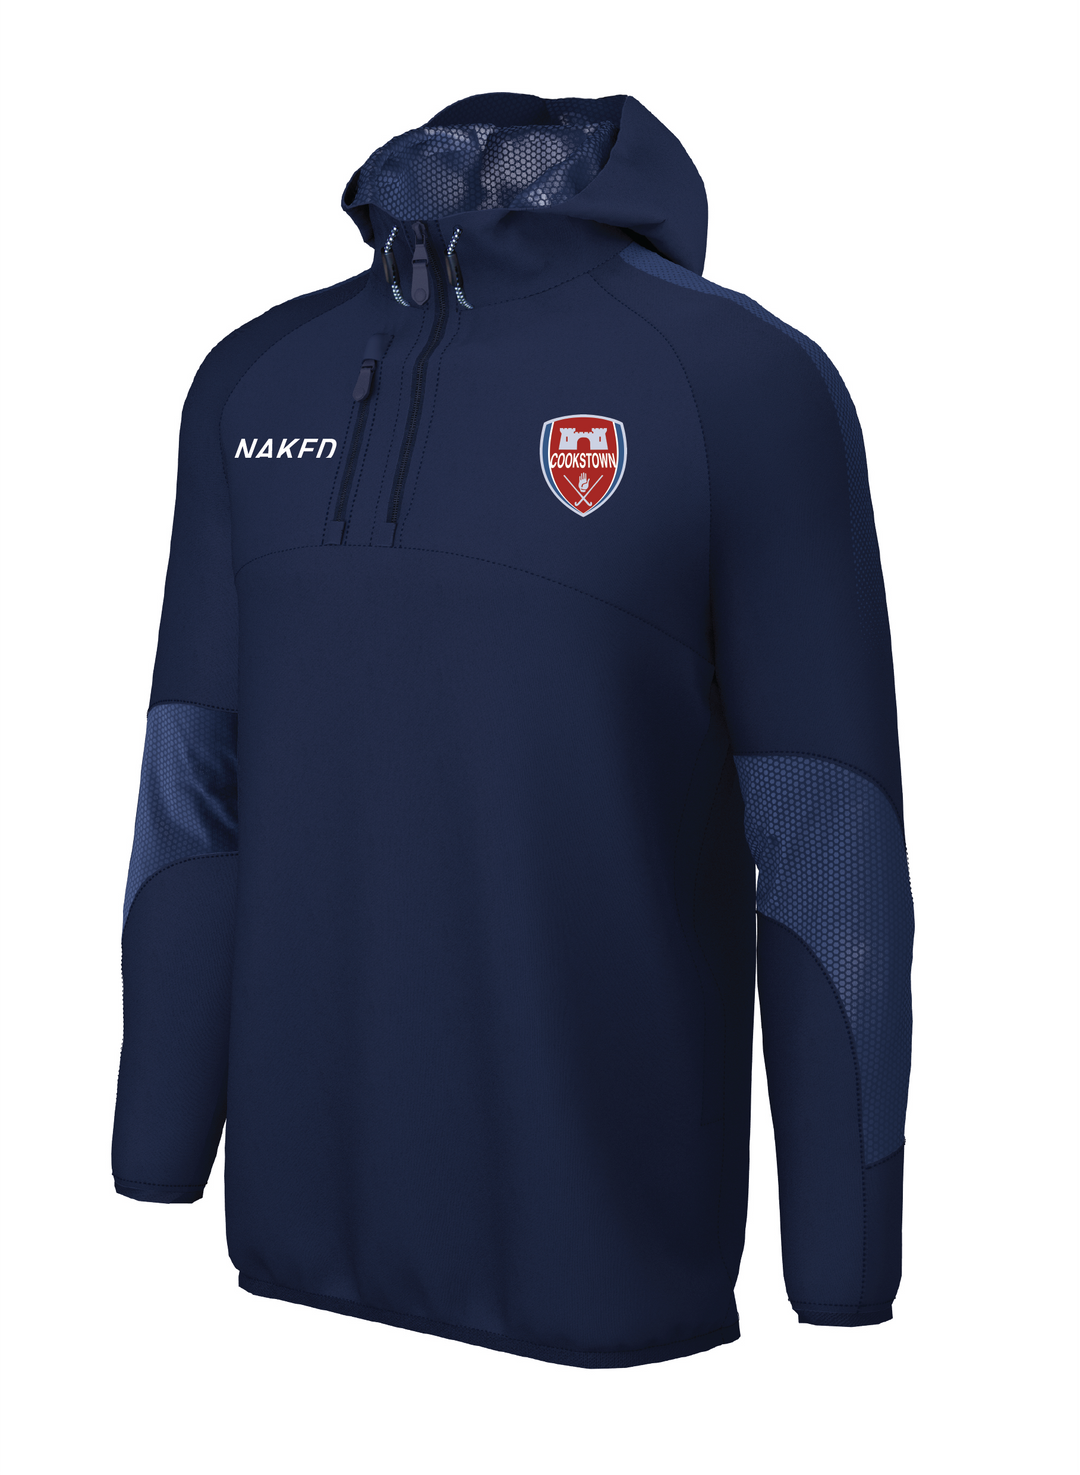 Cookstown Adult 1/4 Zip Jacket 1st/2nd XI ONLY